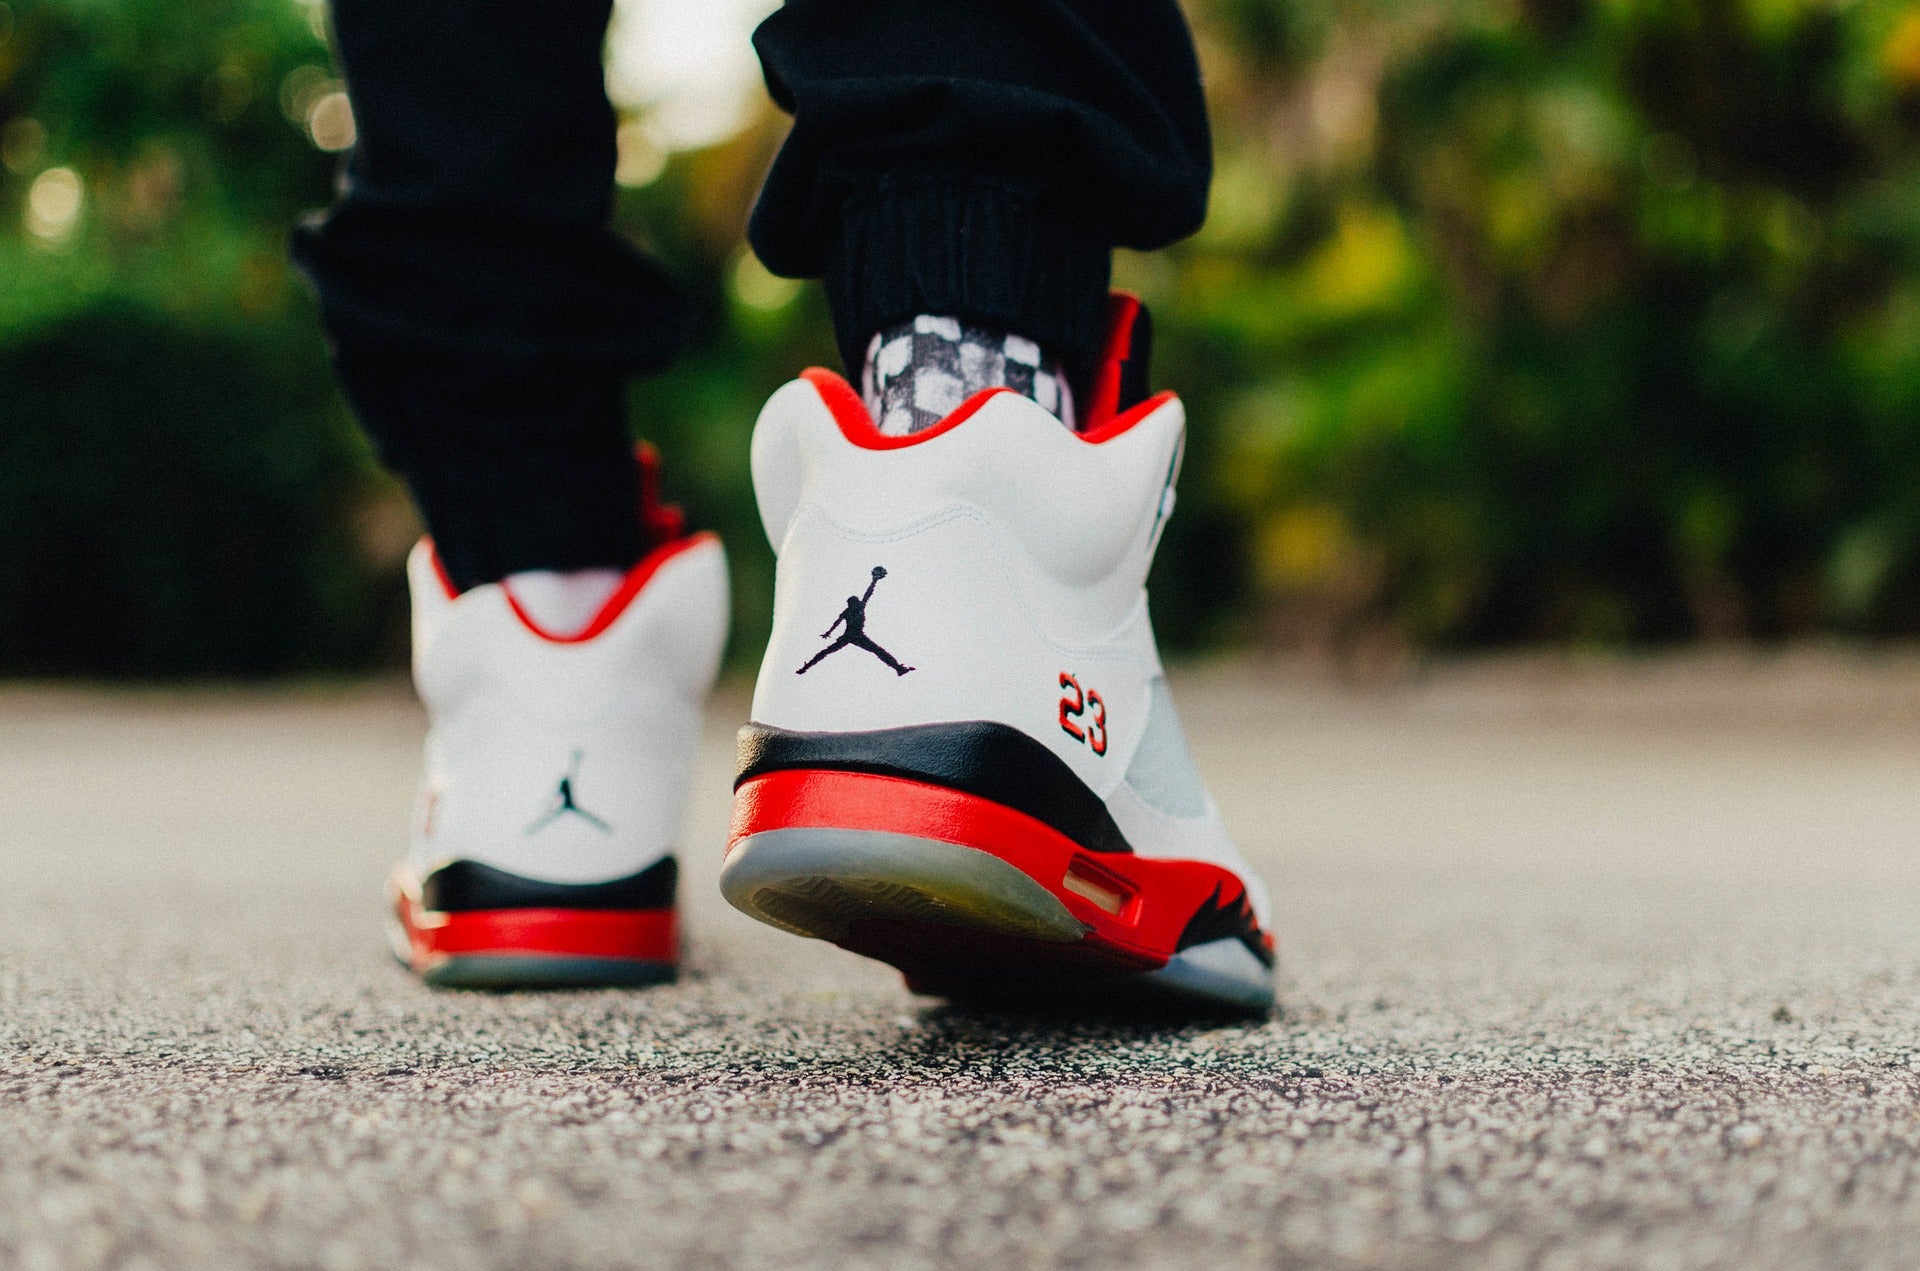 4 WAYS TO STYLE JORDAN 5 FIRE RED - THE LAST DANCE